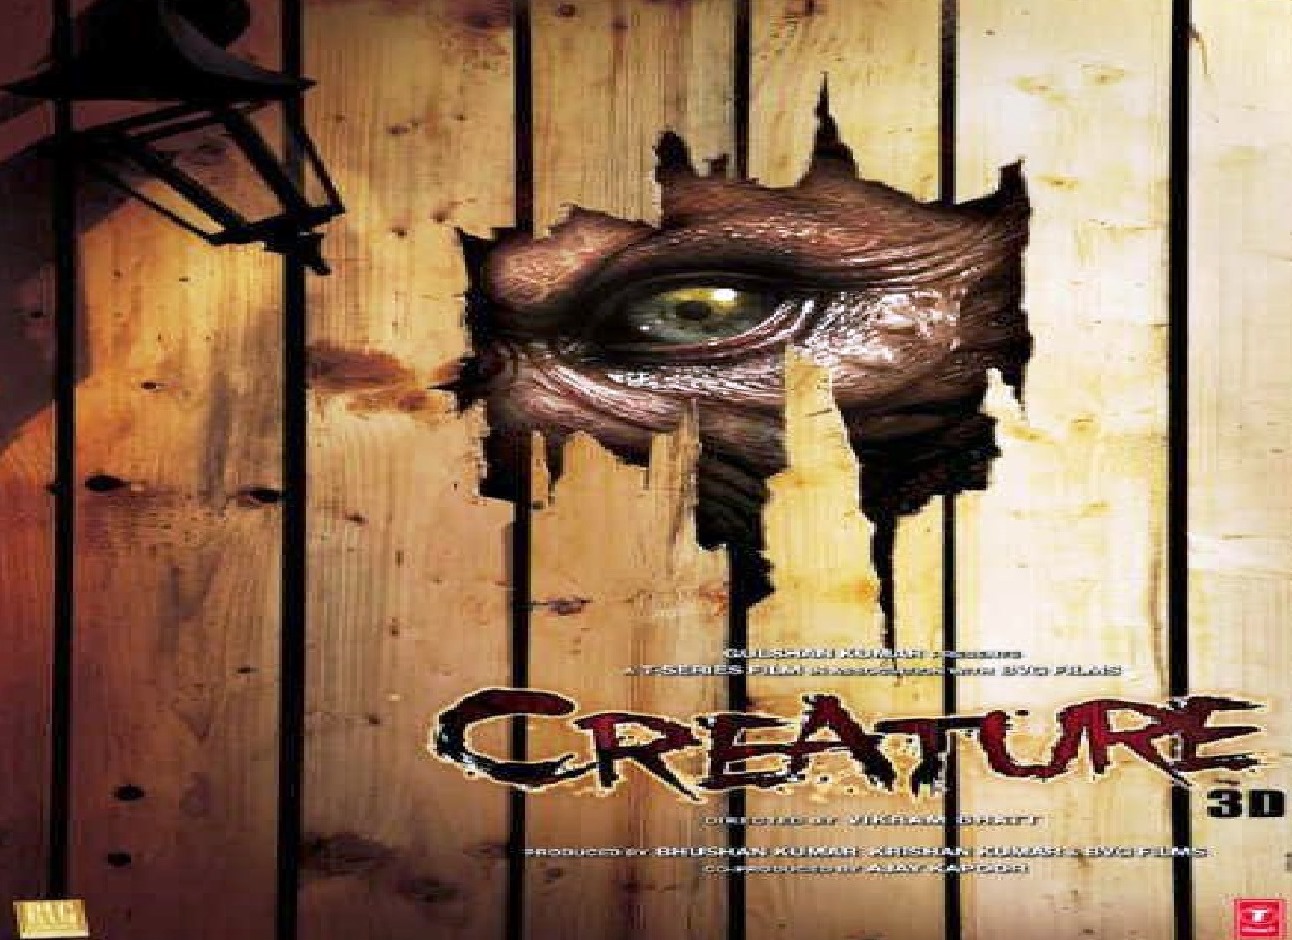 Creature 3D release pushed to sep 12